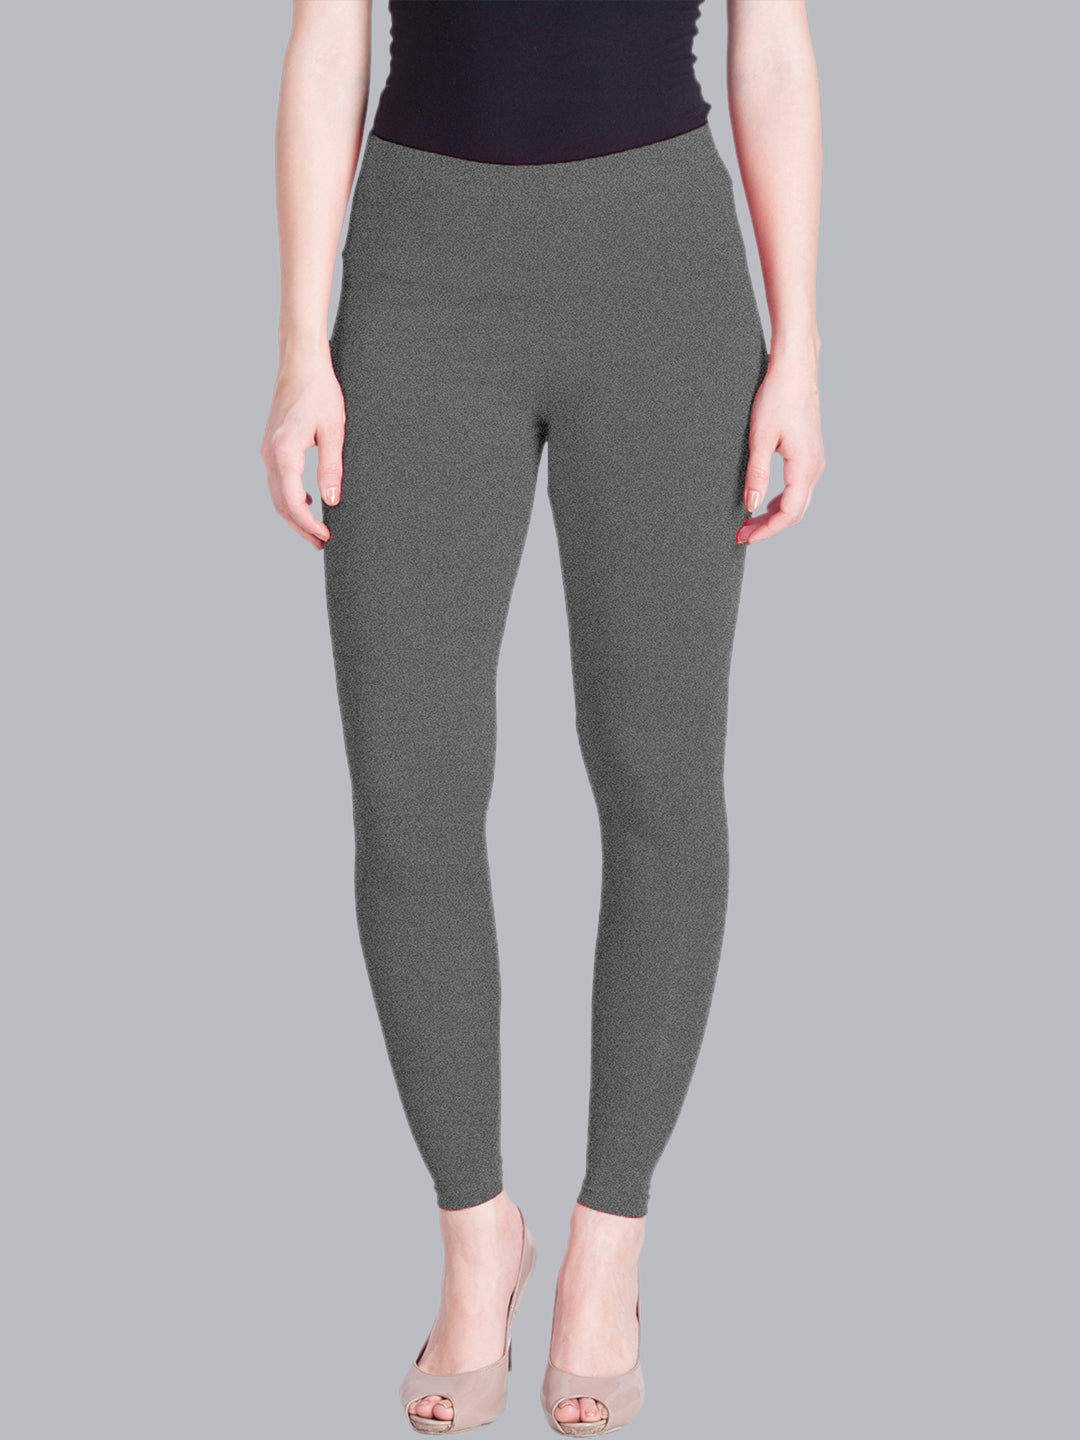 Silver Grey color stretchable cotton ankle Leggings-LGA53